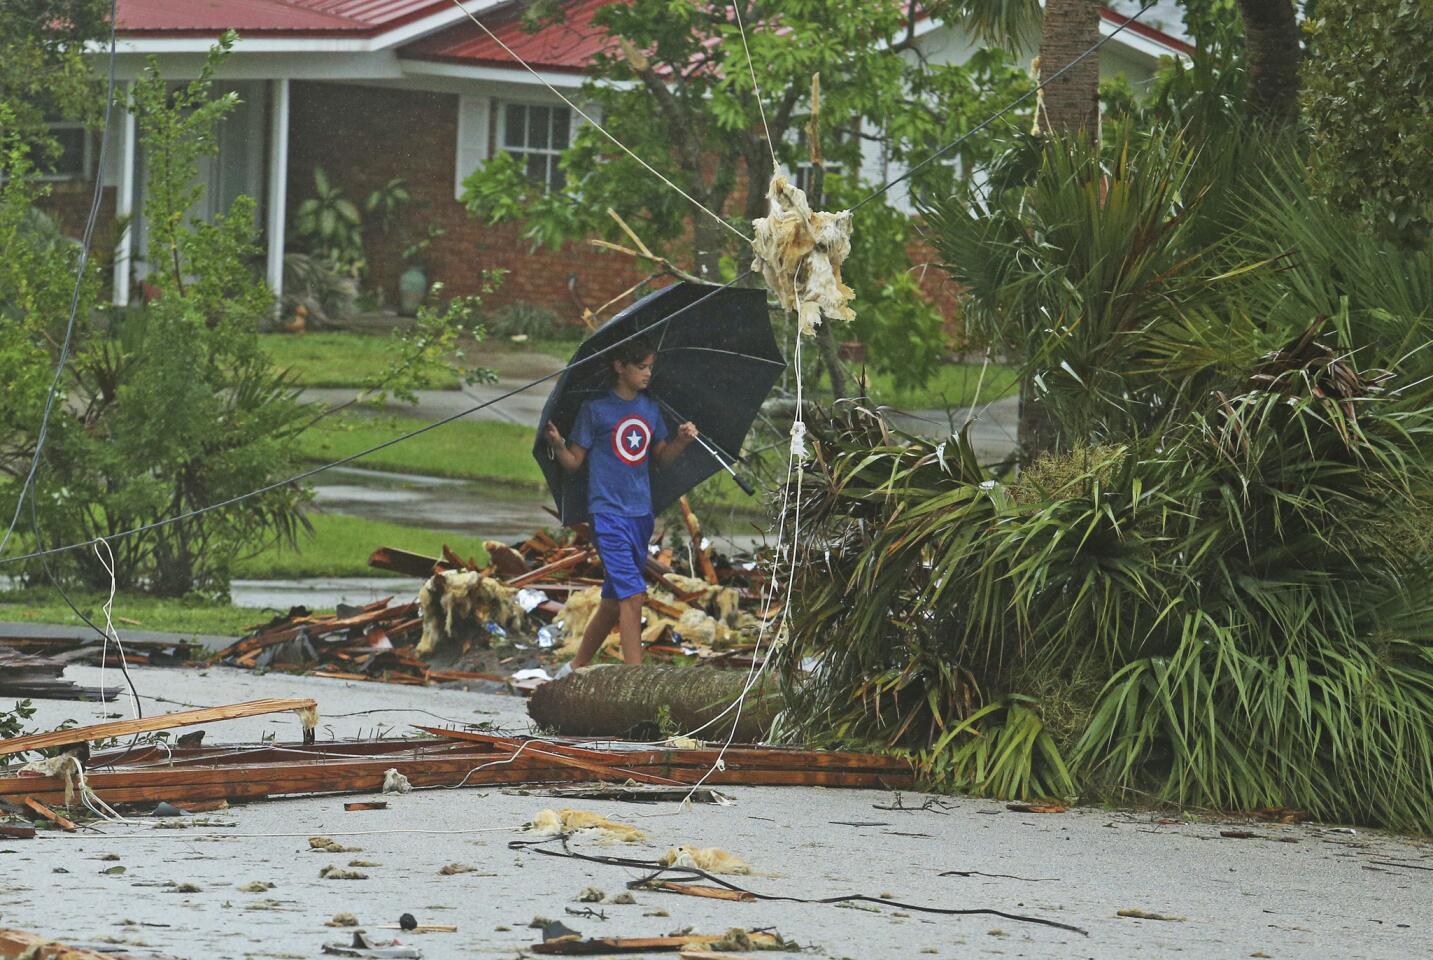 Aden Alcroix-Camper, 11, walks through debris from a second-story roof scattered over a two-block area in Palm Bay, Fla., on Sept. 10, 2017, as Hurricane Irma made landfall.